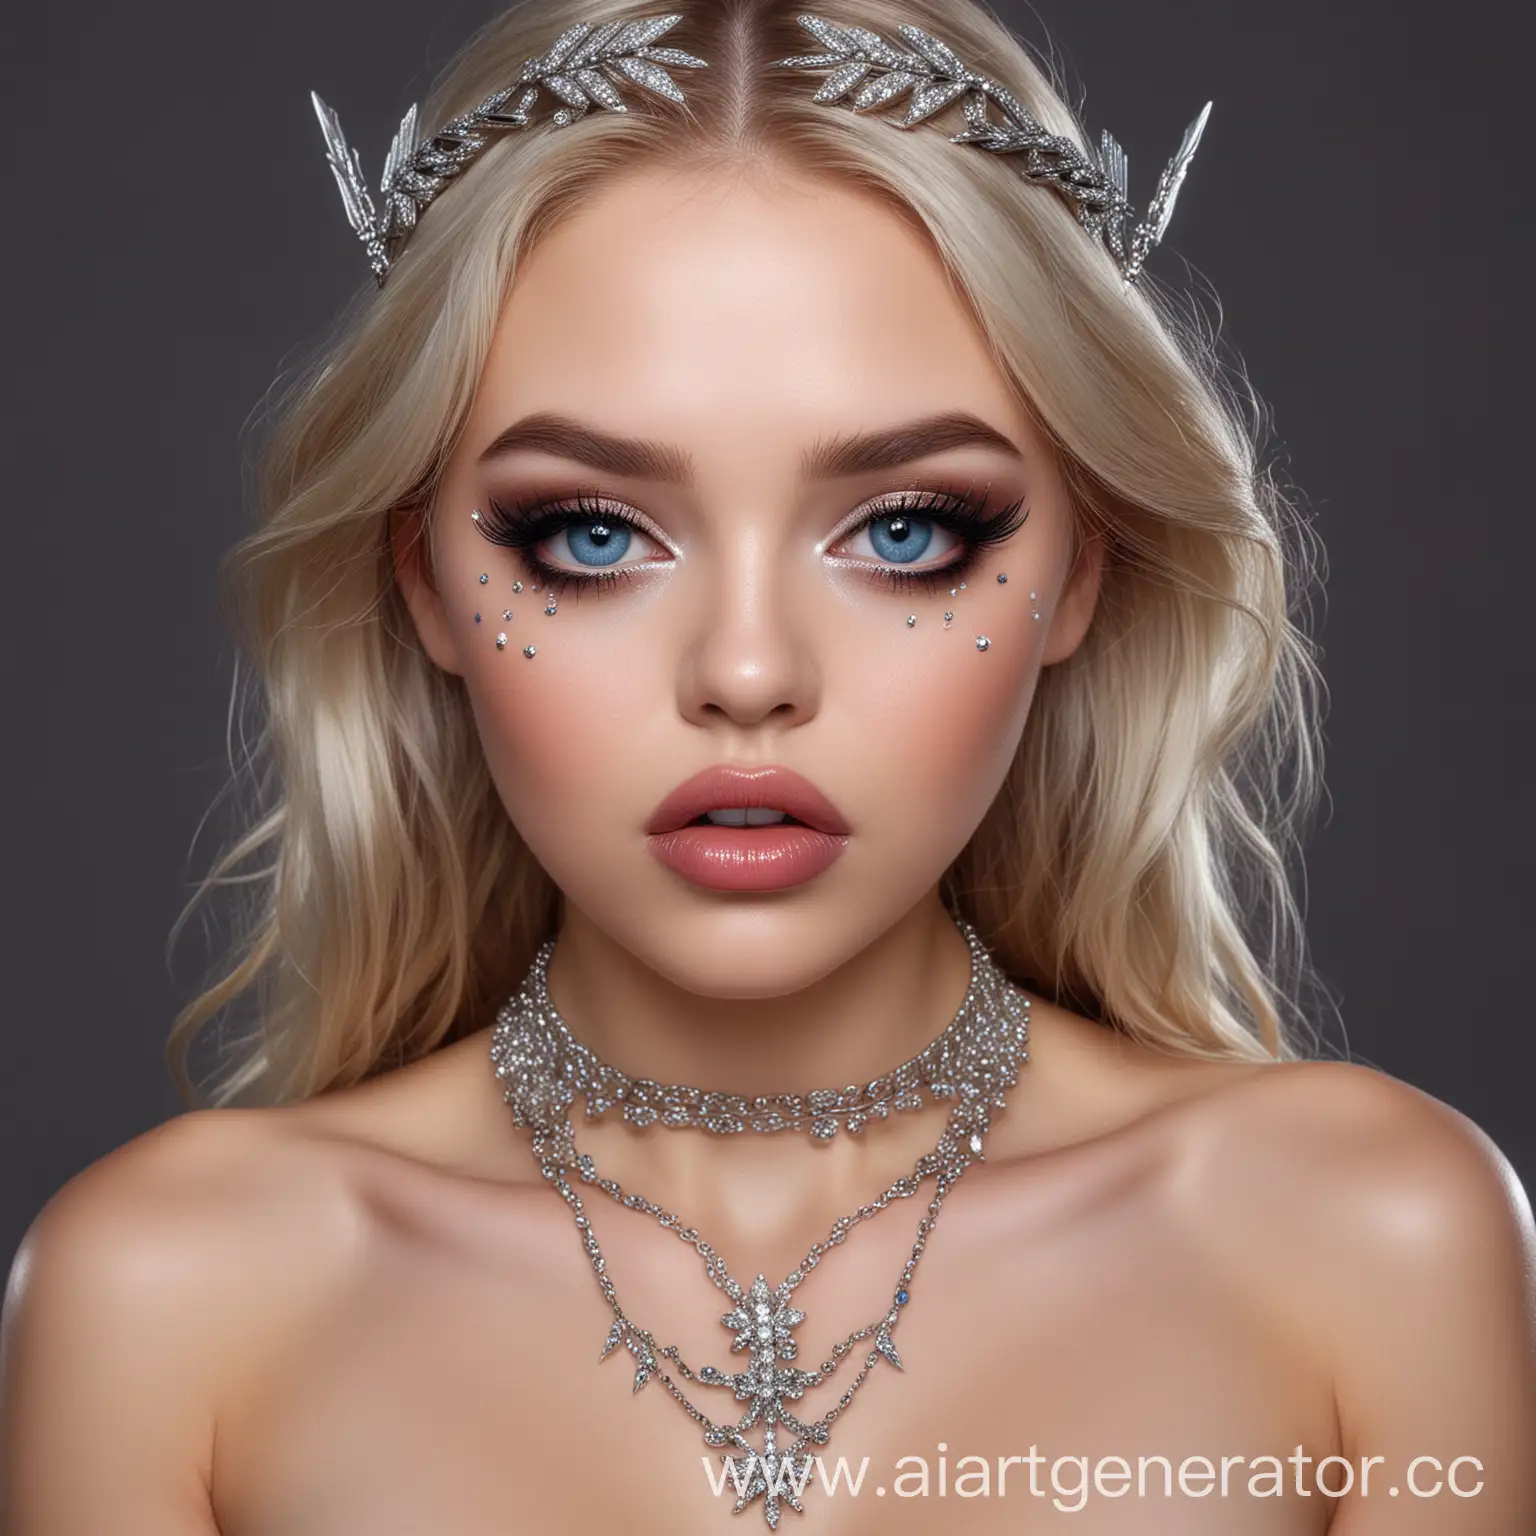 SemiNaked-Angel-Girl-with-Diamond-Chain-Necklace-and-Bold-Makeup